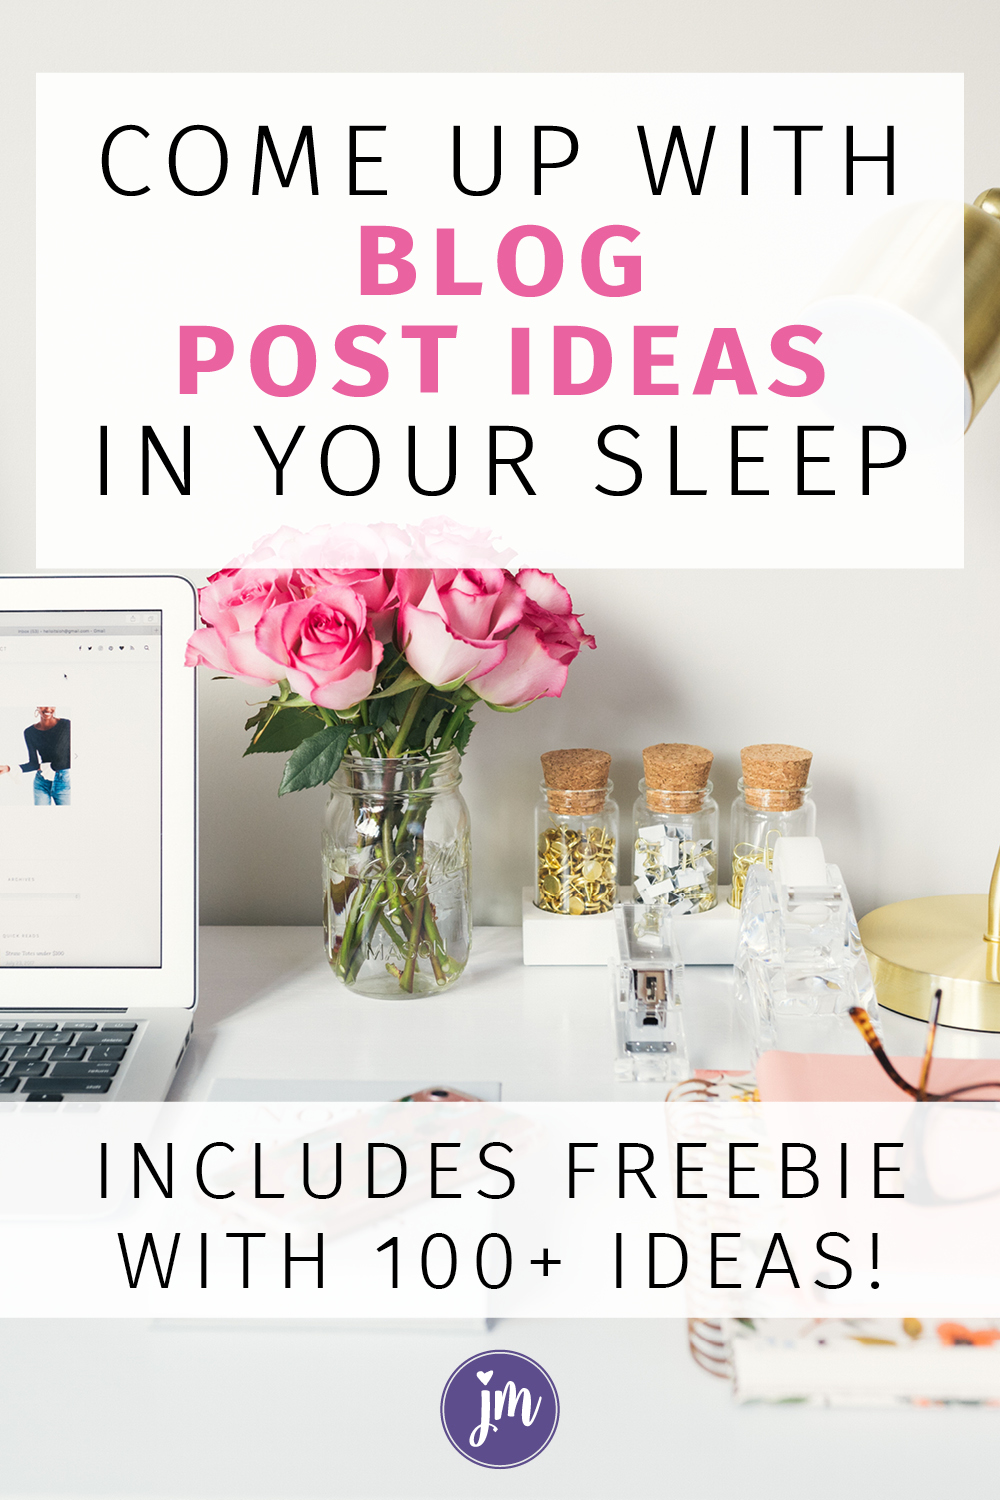 Need blog post ideas? Here's a freebie for 100+ ideas plus deeper dives into three that work for this blogger every day. I'm going to try #3 ASAP.